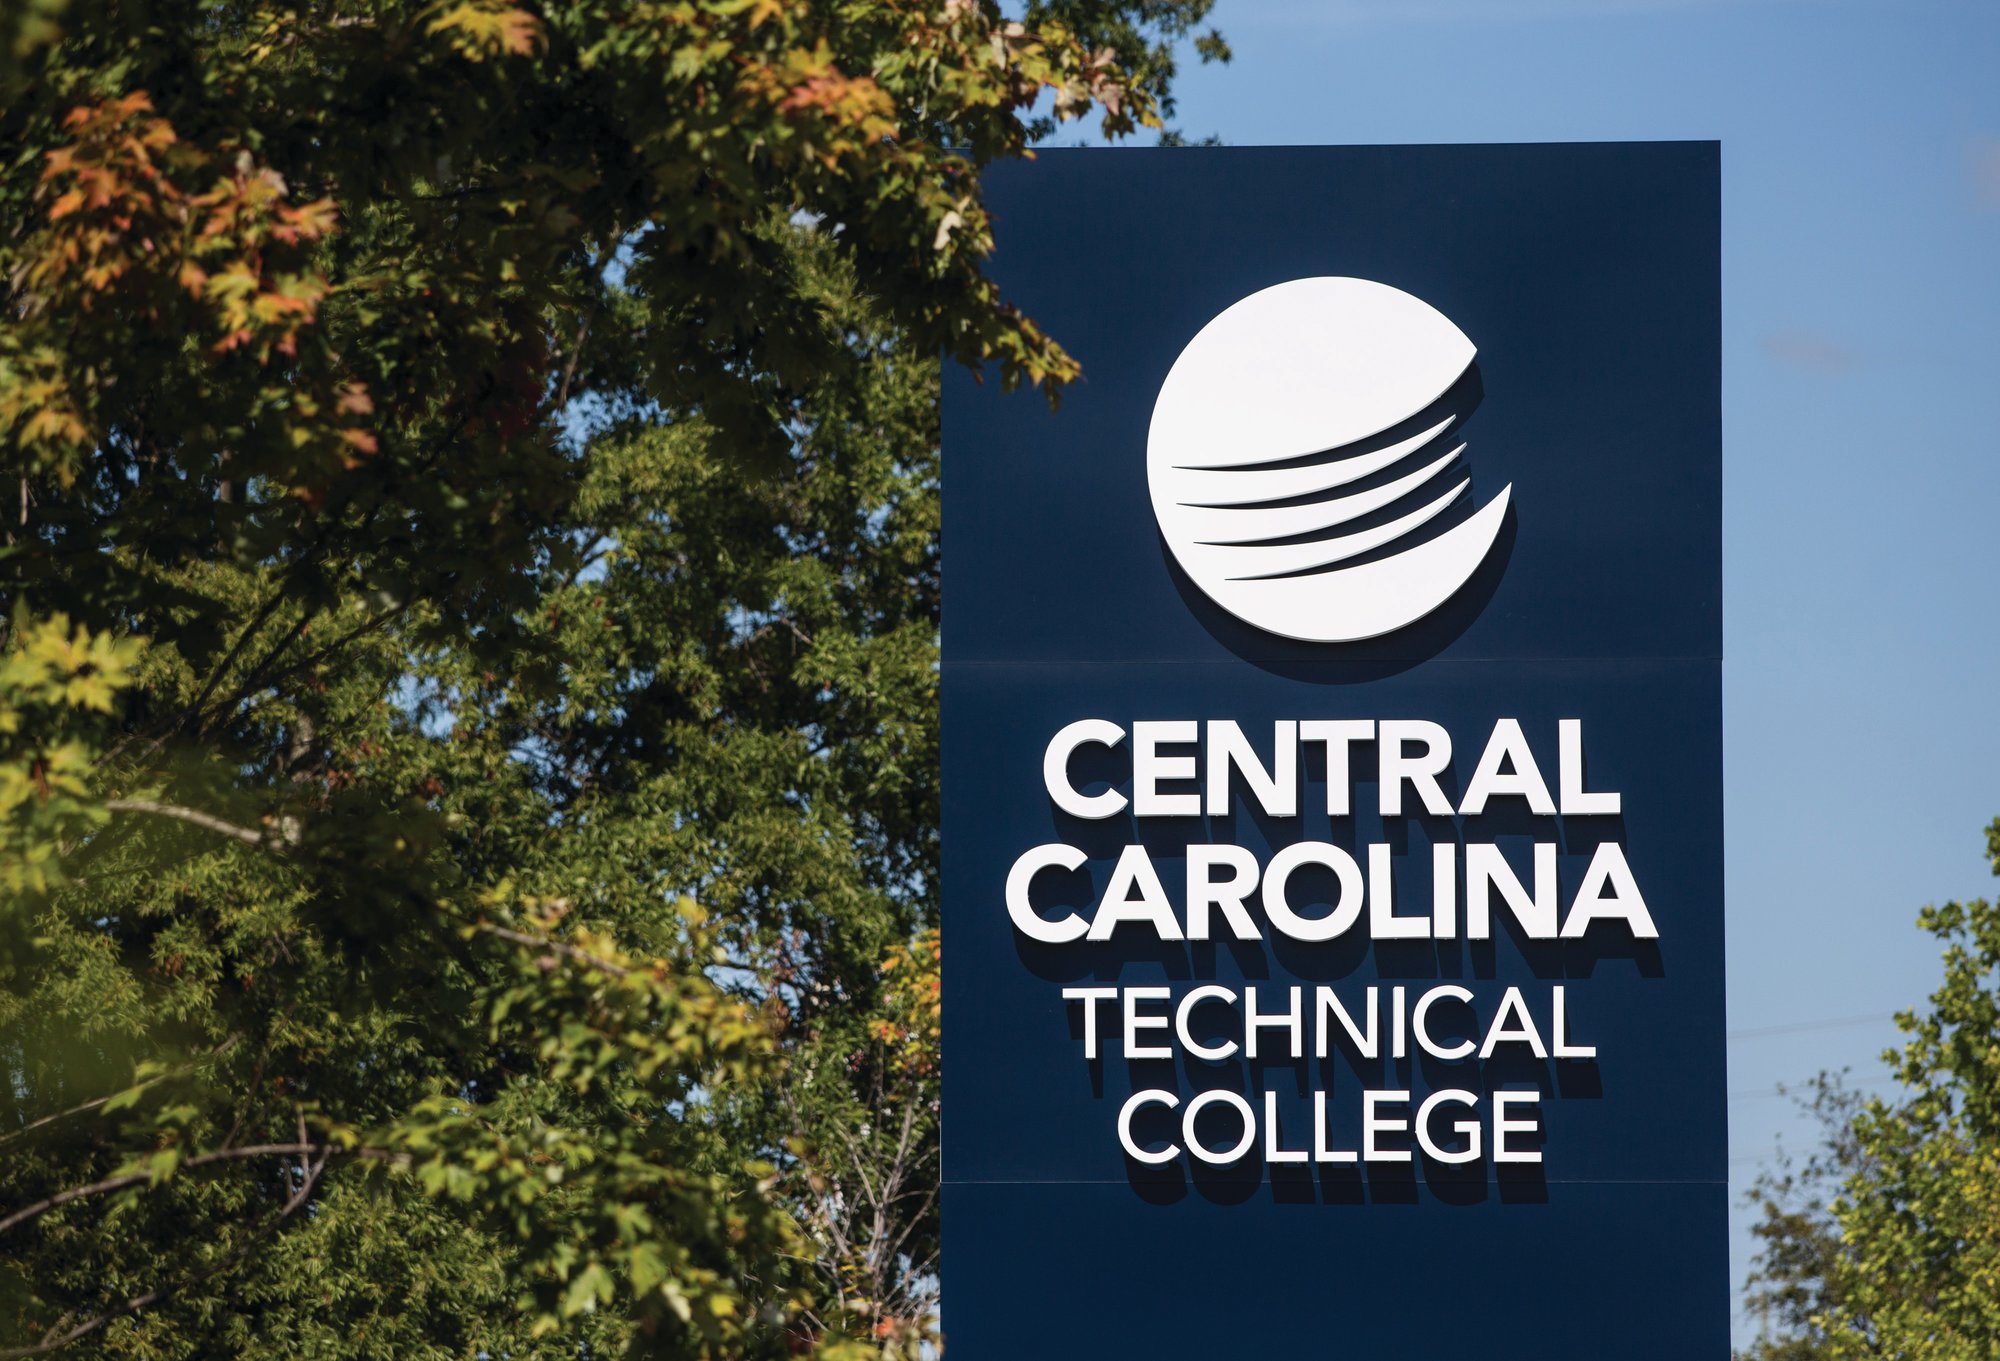 Central Carolina sees 20% enrollment jump; Increase due to various factors, including no-cost tuition, new branding, more flexibility